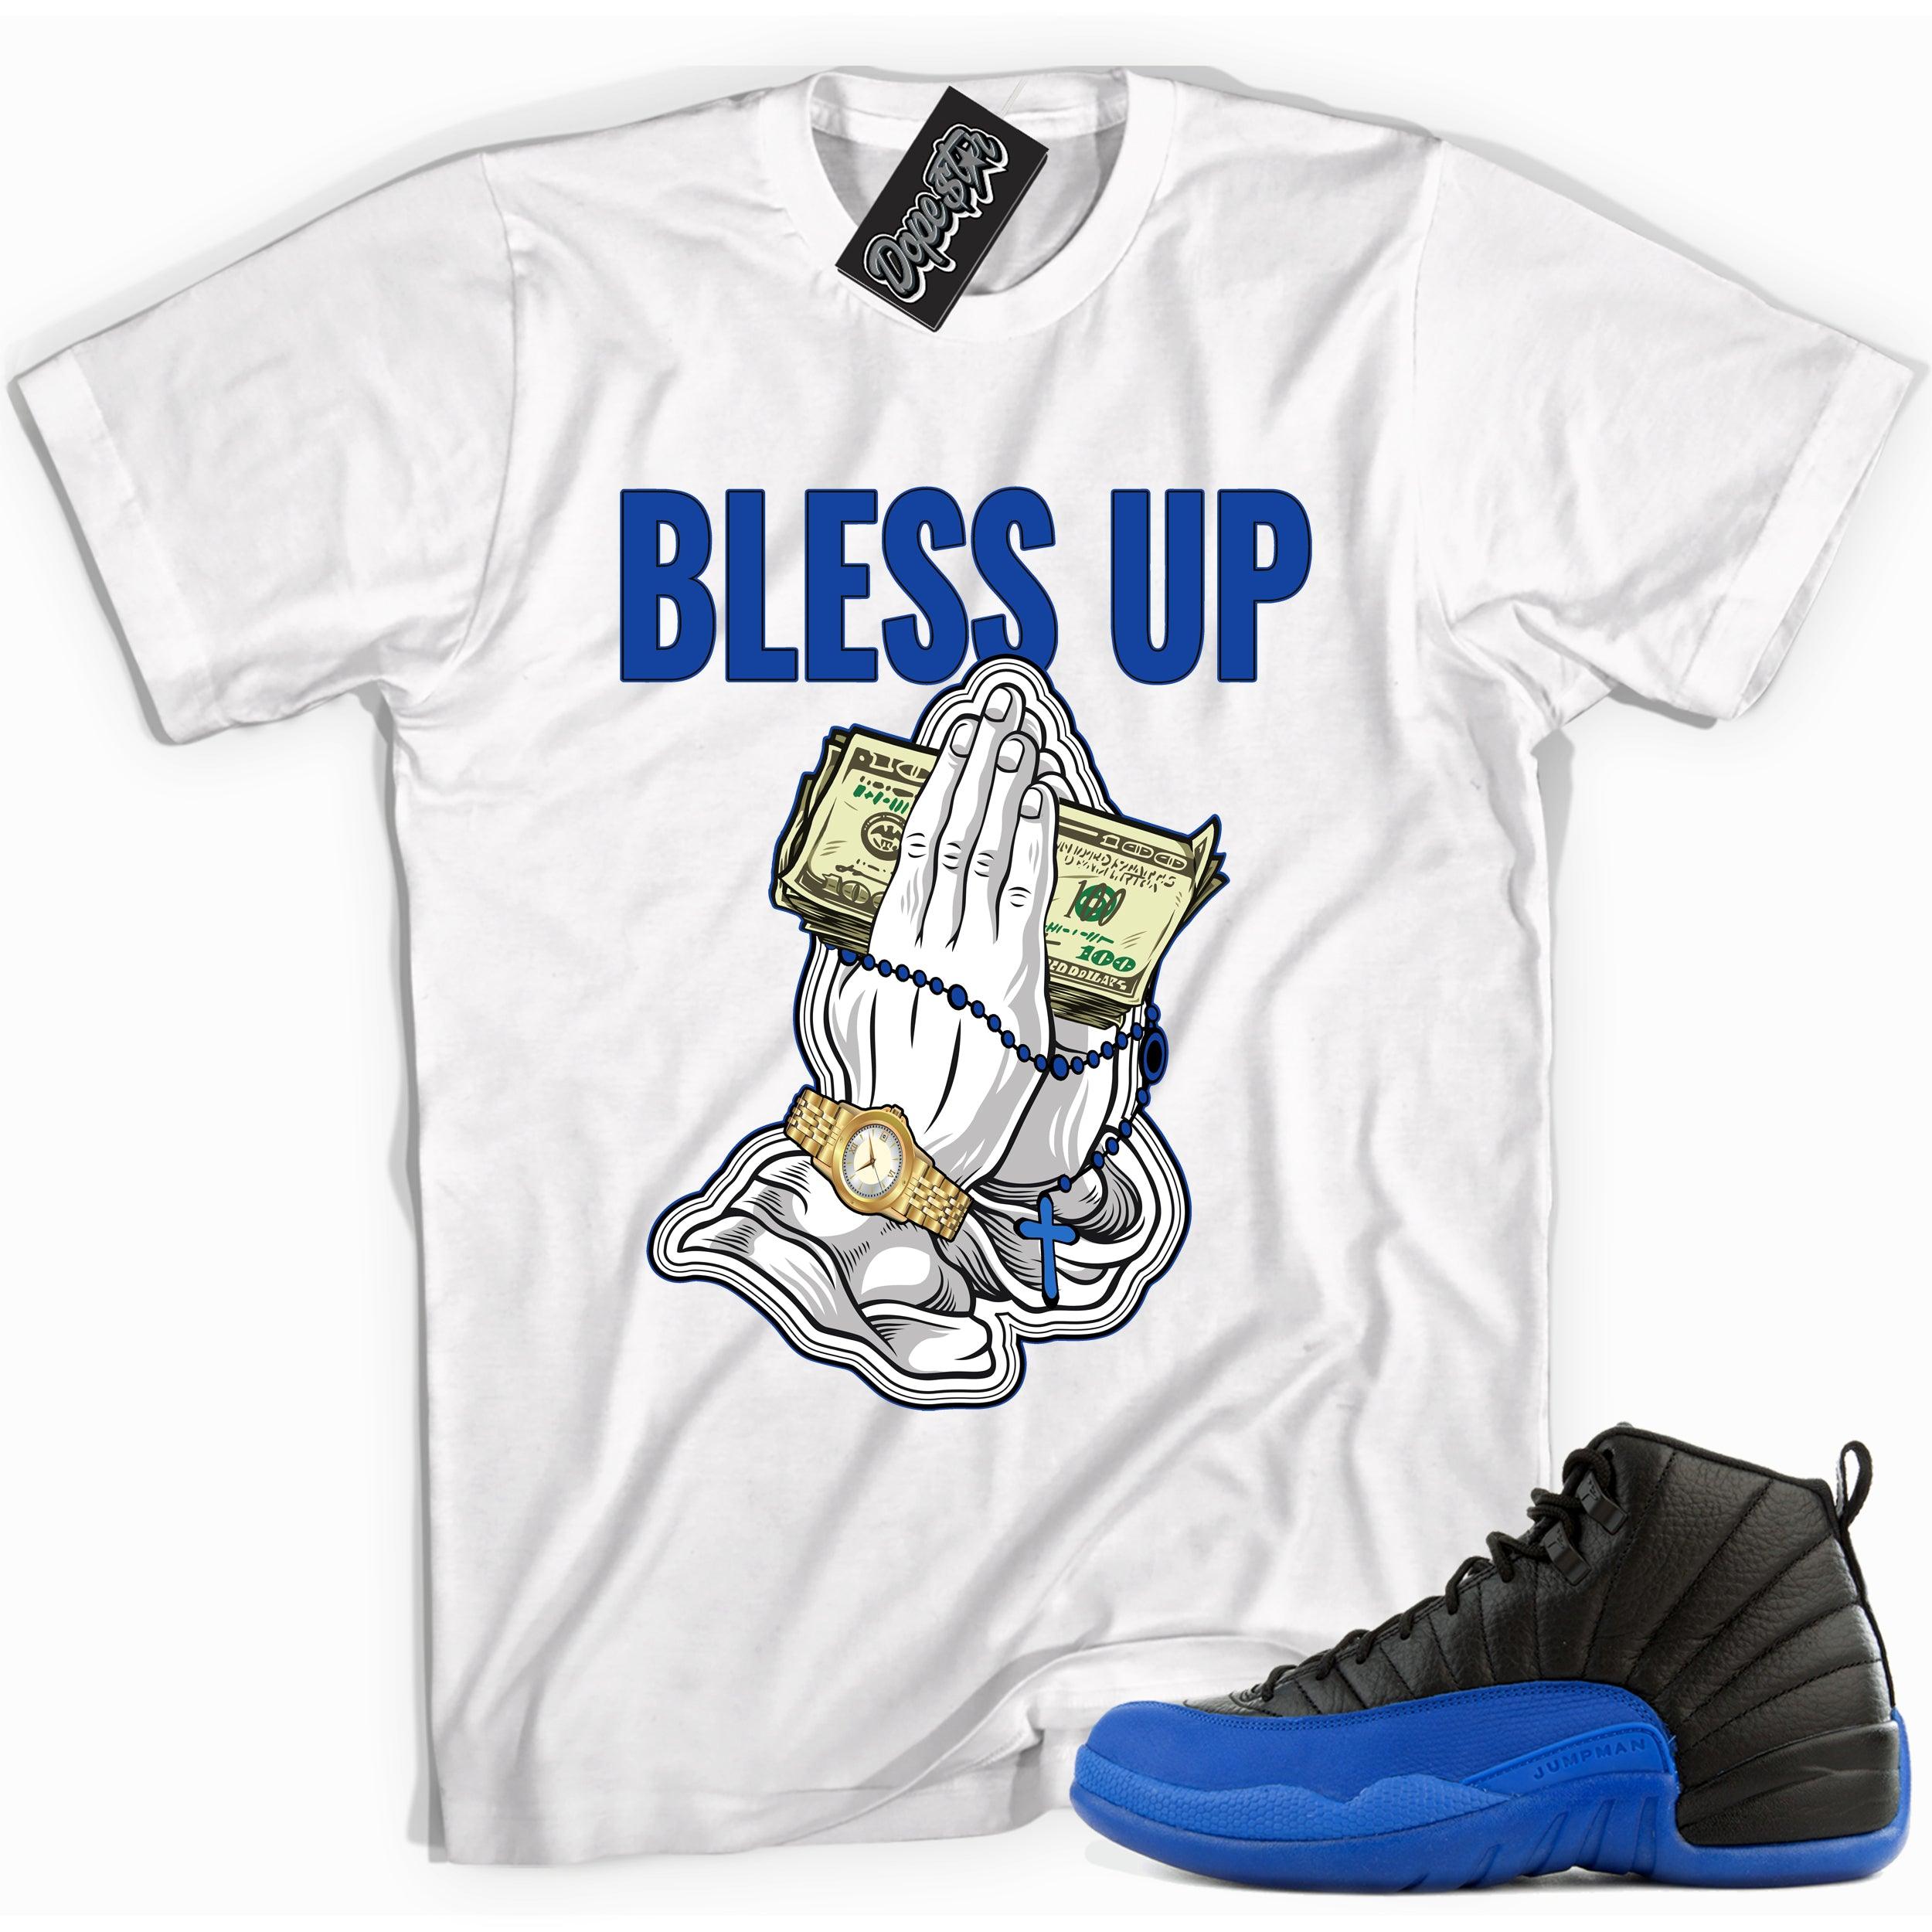 Cool WHITE graphic tee with 'BLESS UP' print, that perfectly matches Air Jordan 12 Retro Black Game Royal sneakers.